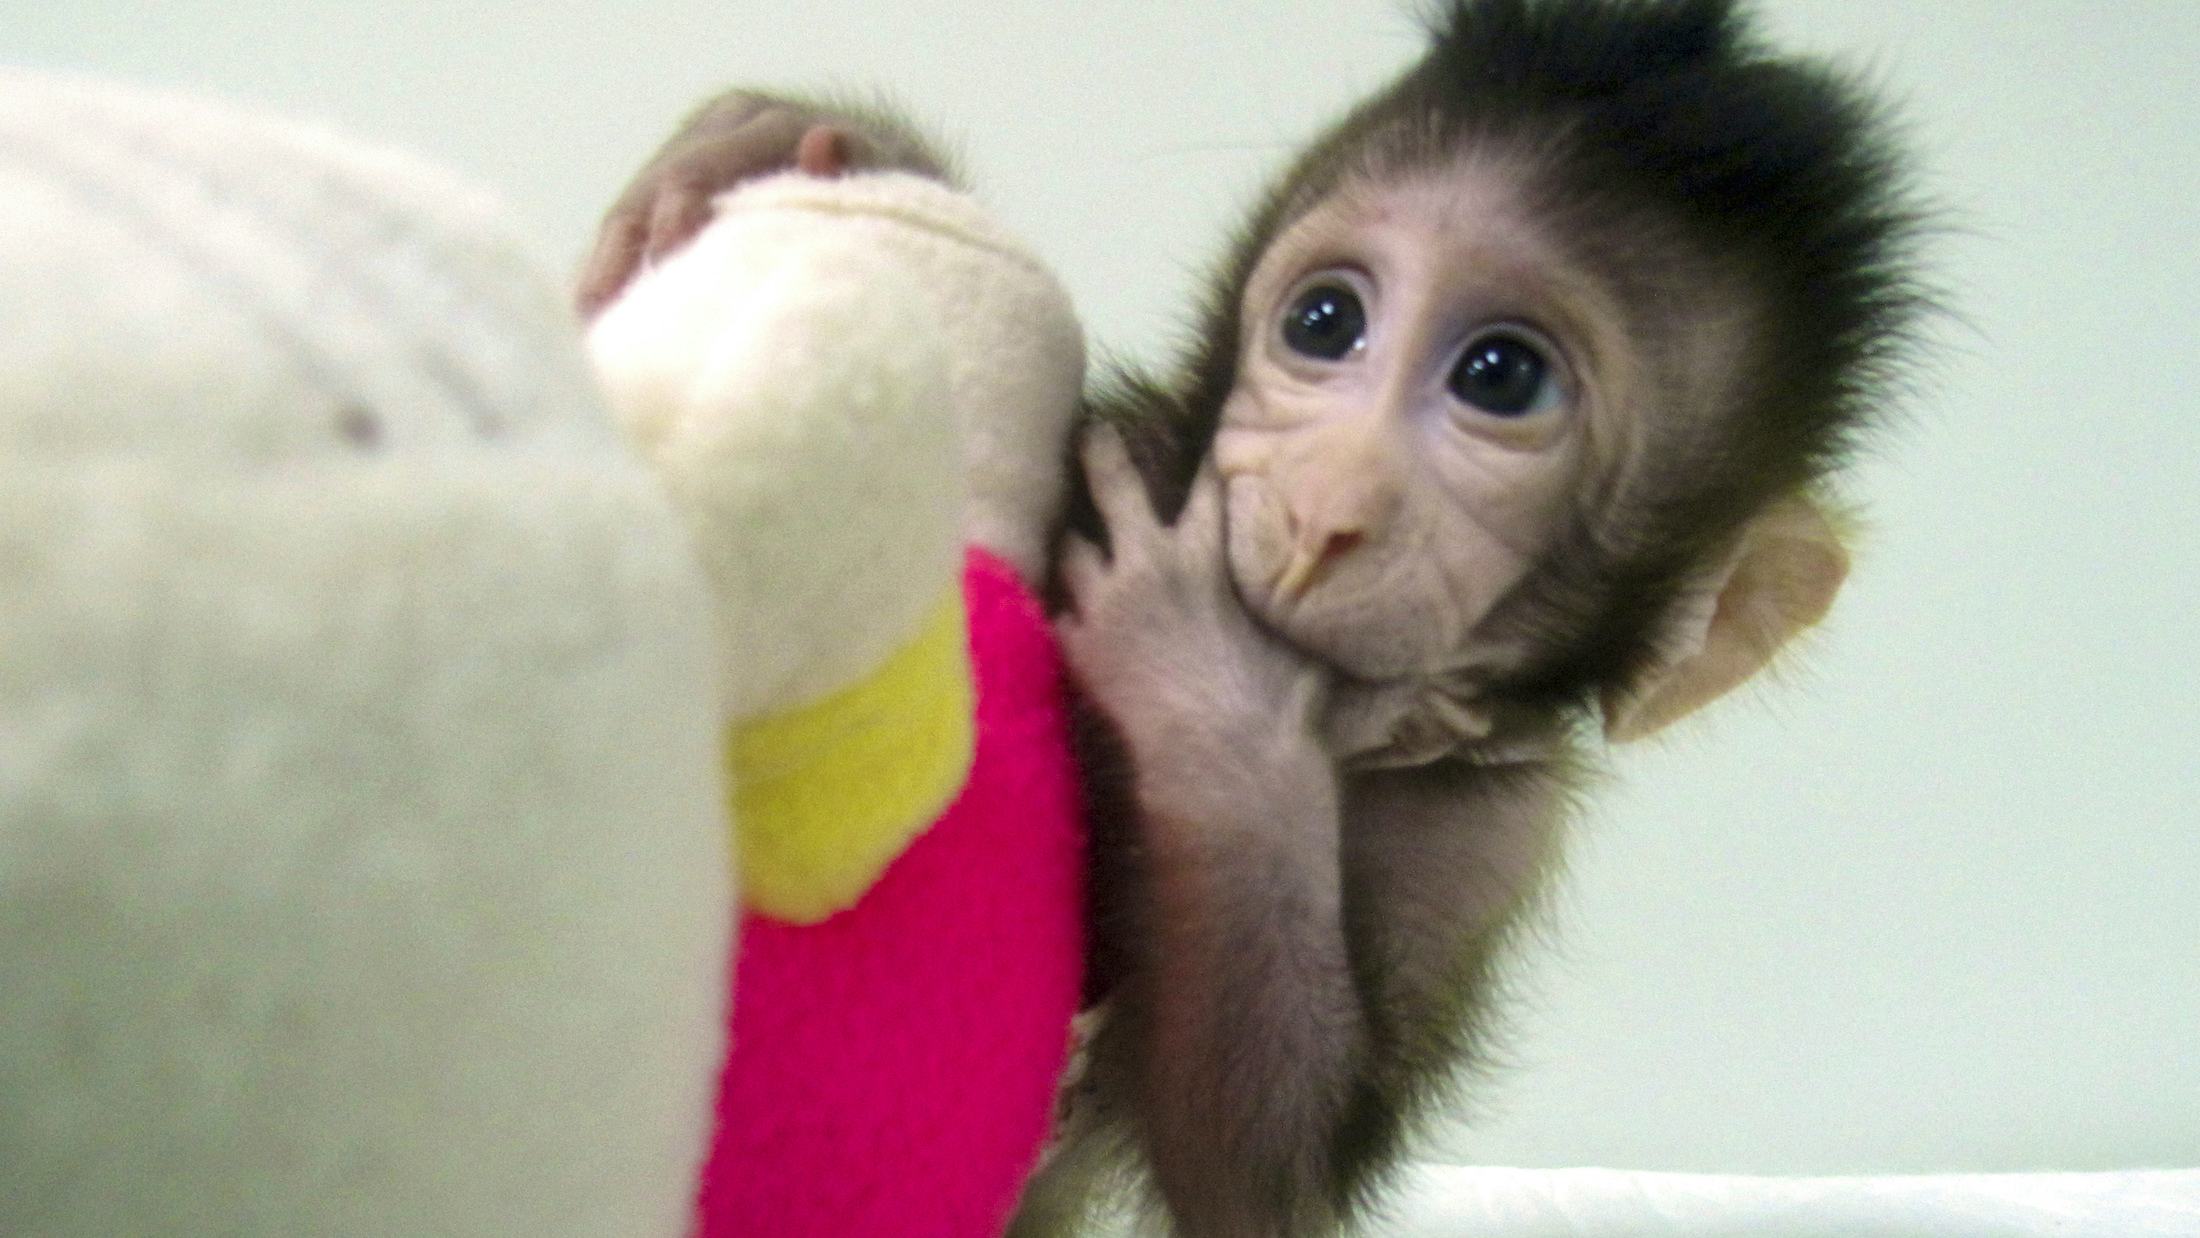 Newsela - Meet two baby monkeys who were cloned in China